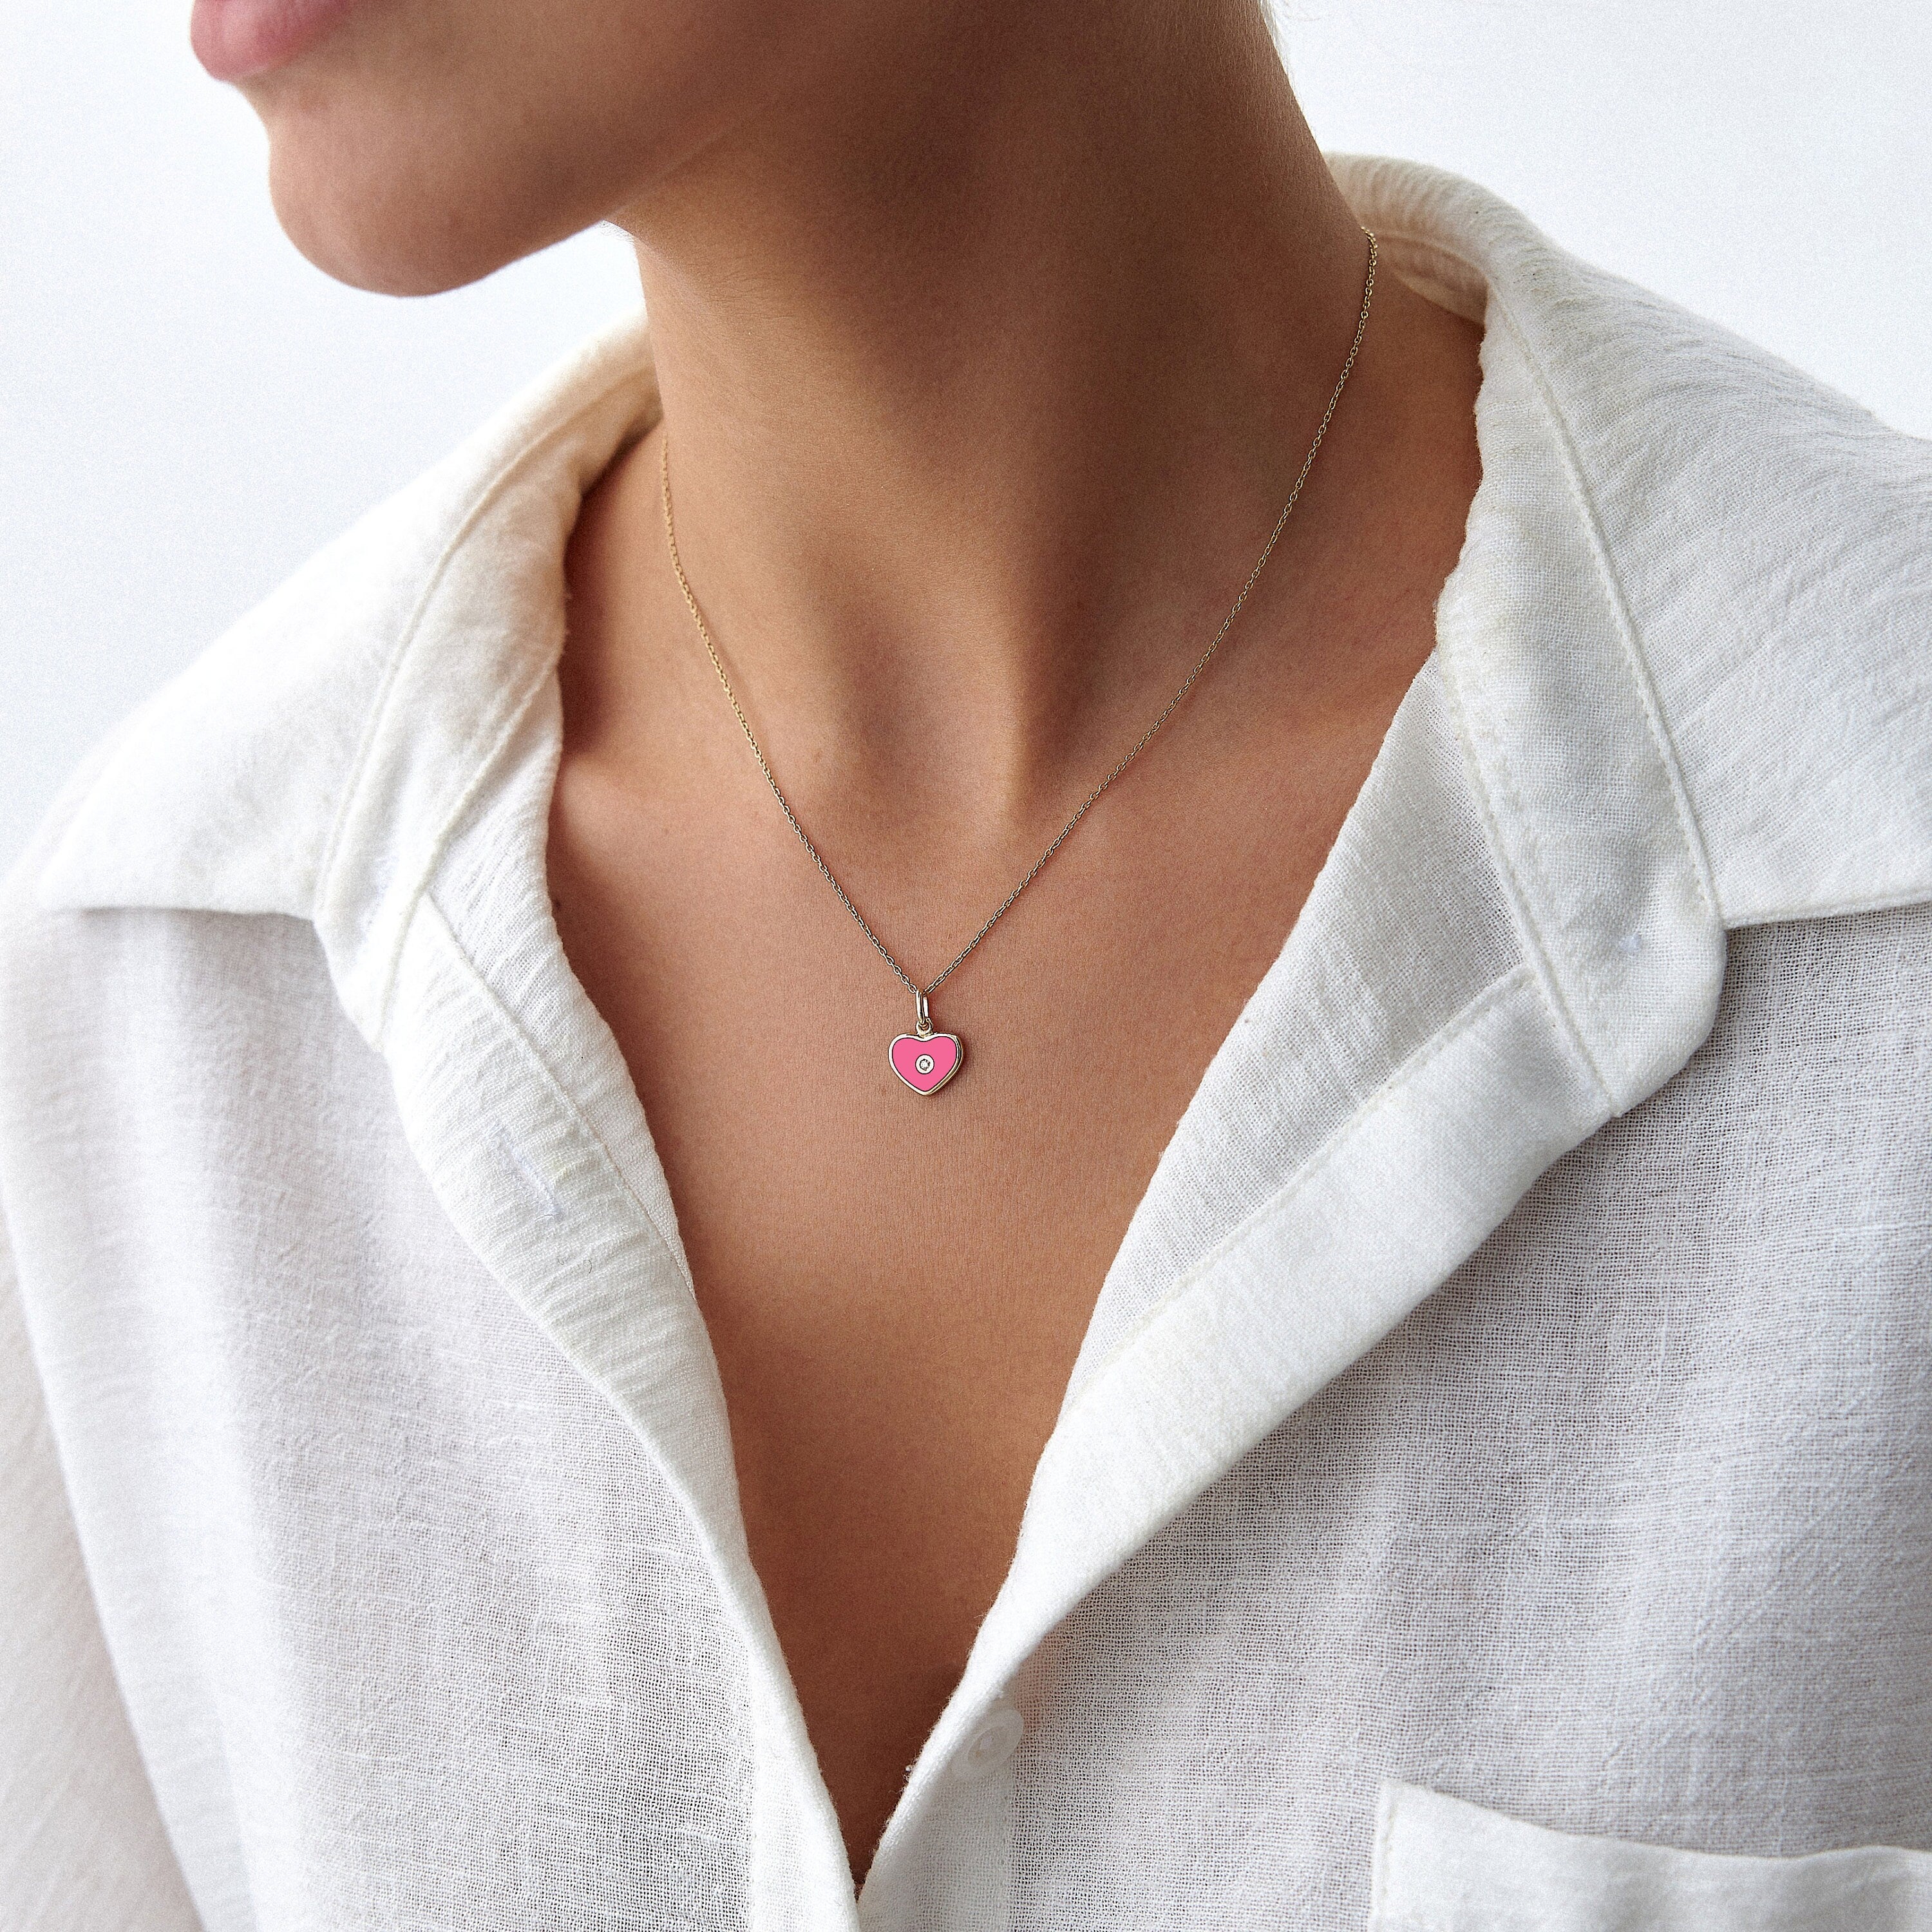 Tiny Pink Diamond Heart Pendant Necklace in 14K Gold